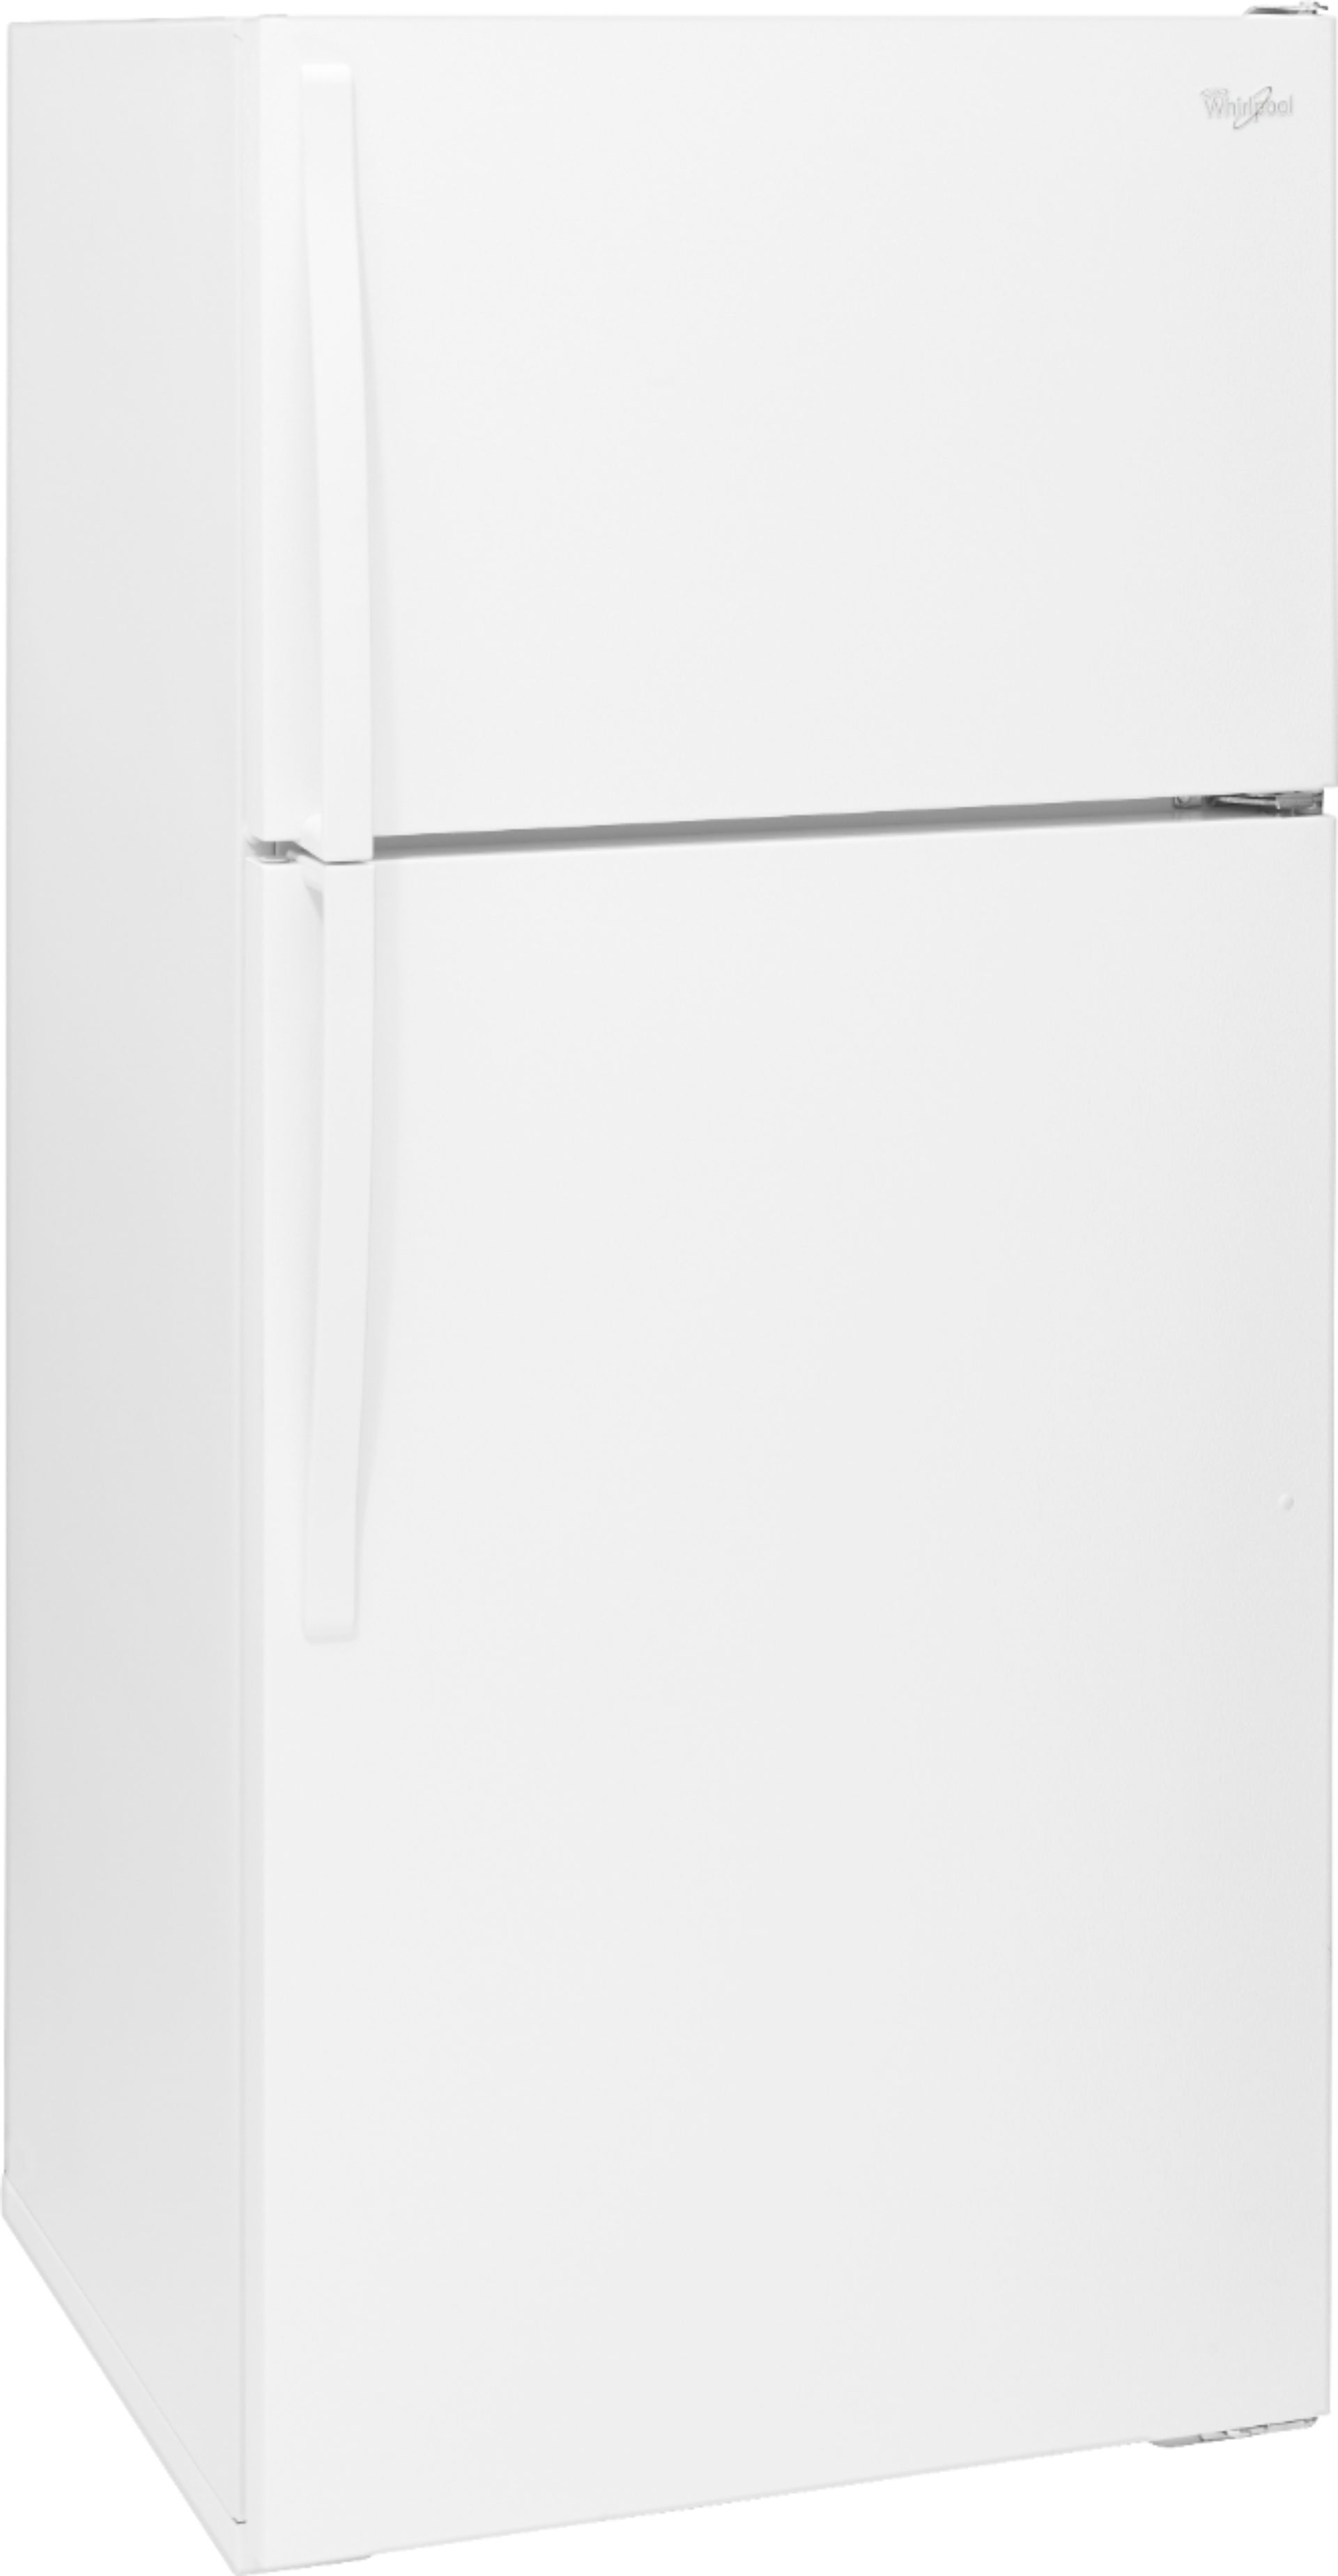 Angle View: Hotpoint - 17.53 Cu. Ft. Top-Freezer Refrigerator - White